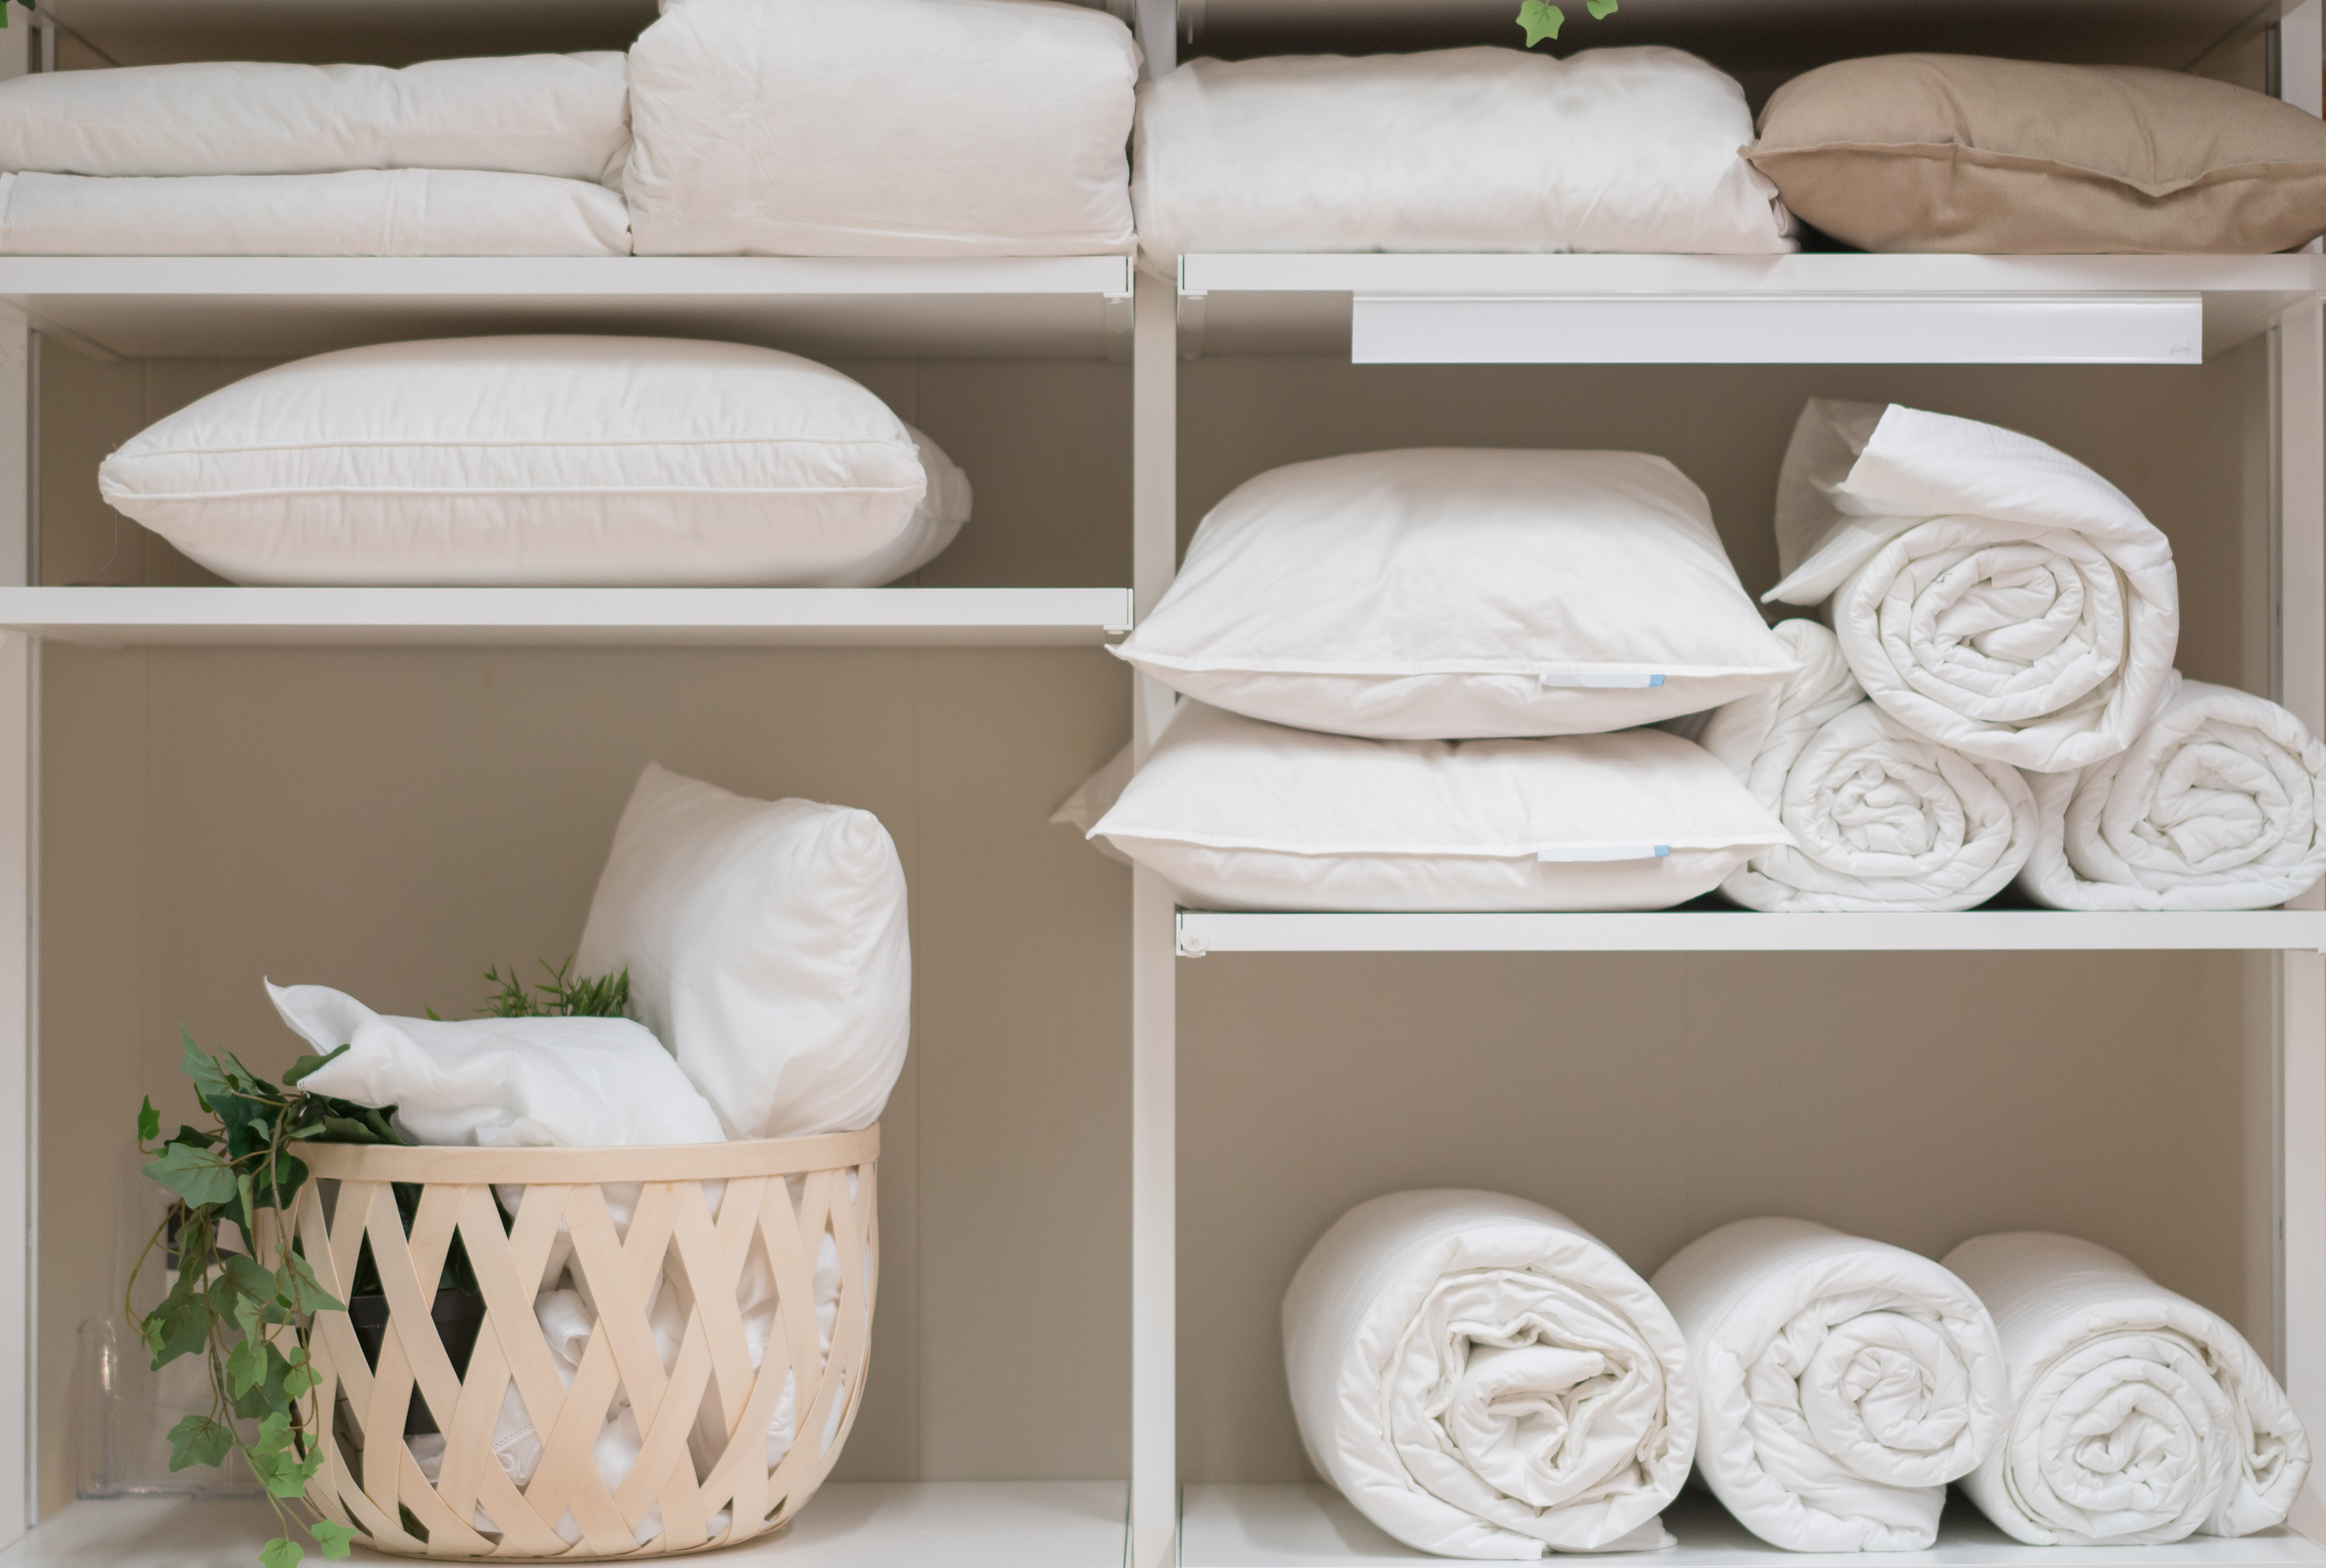 Various household items such as pillows and quilts standing in the white cupboard in the laundry room